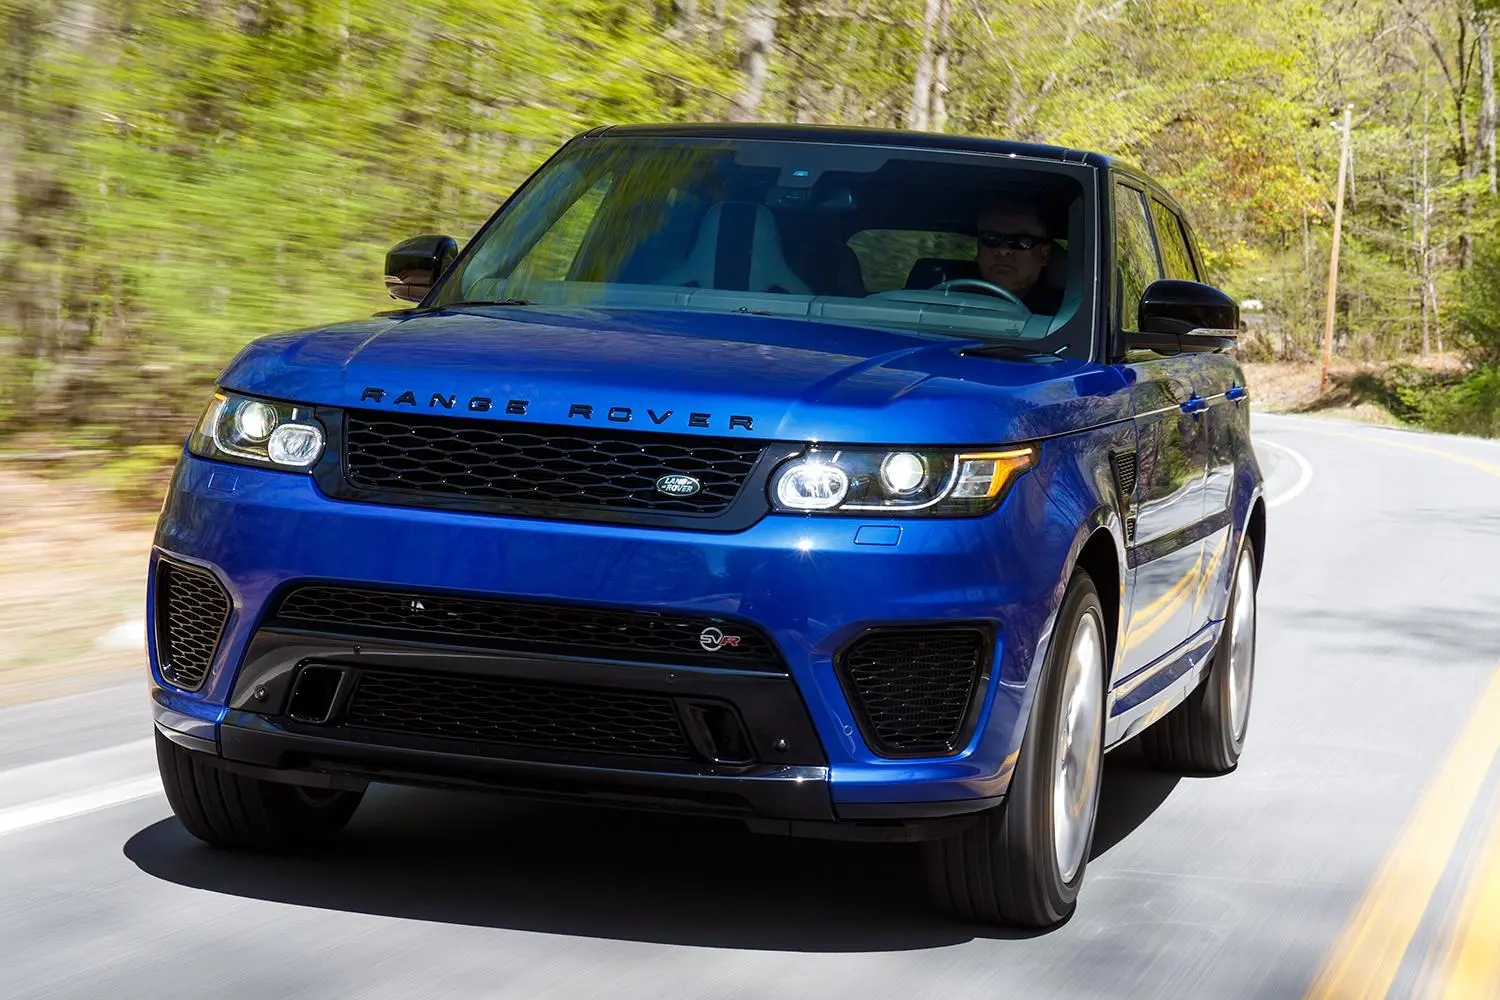 How To Rent A Range Rover SVR In Dubai